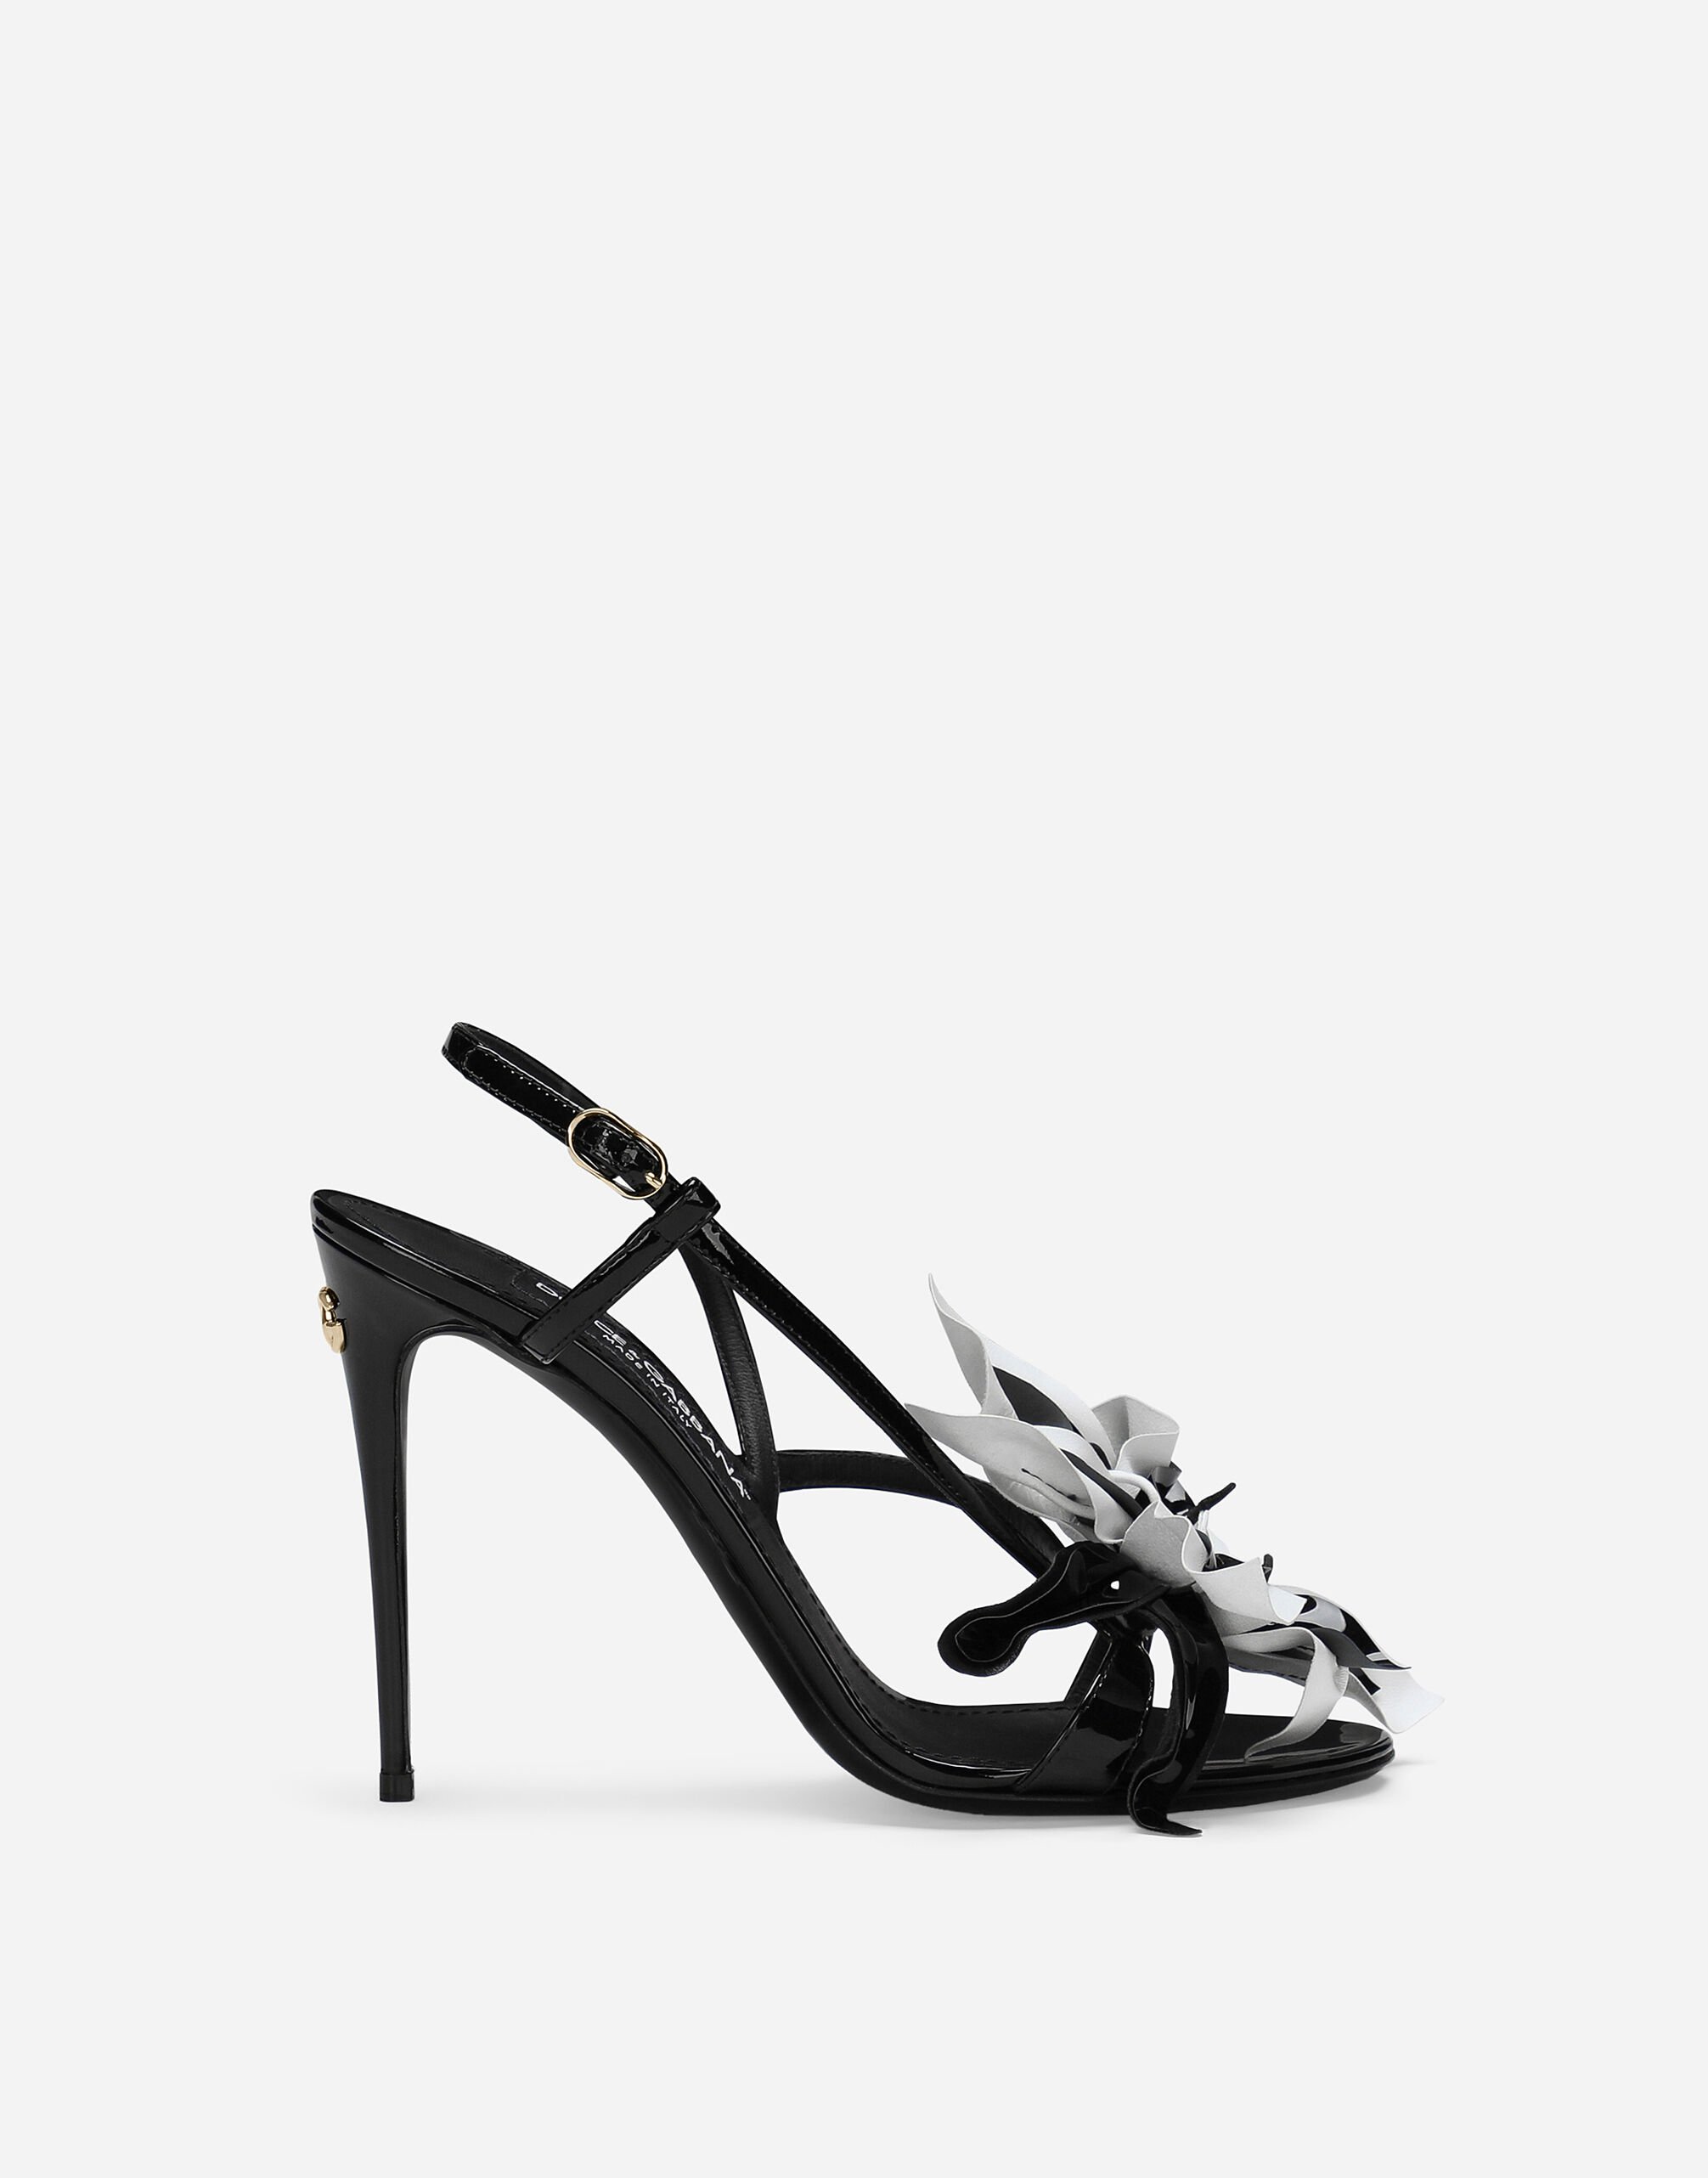 Patent leather sandals in Black for | Dolce&Gabbana® US